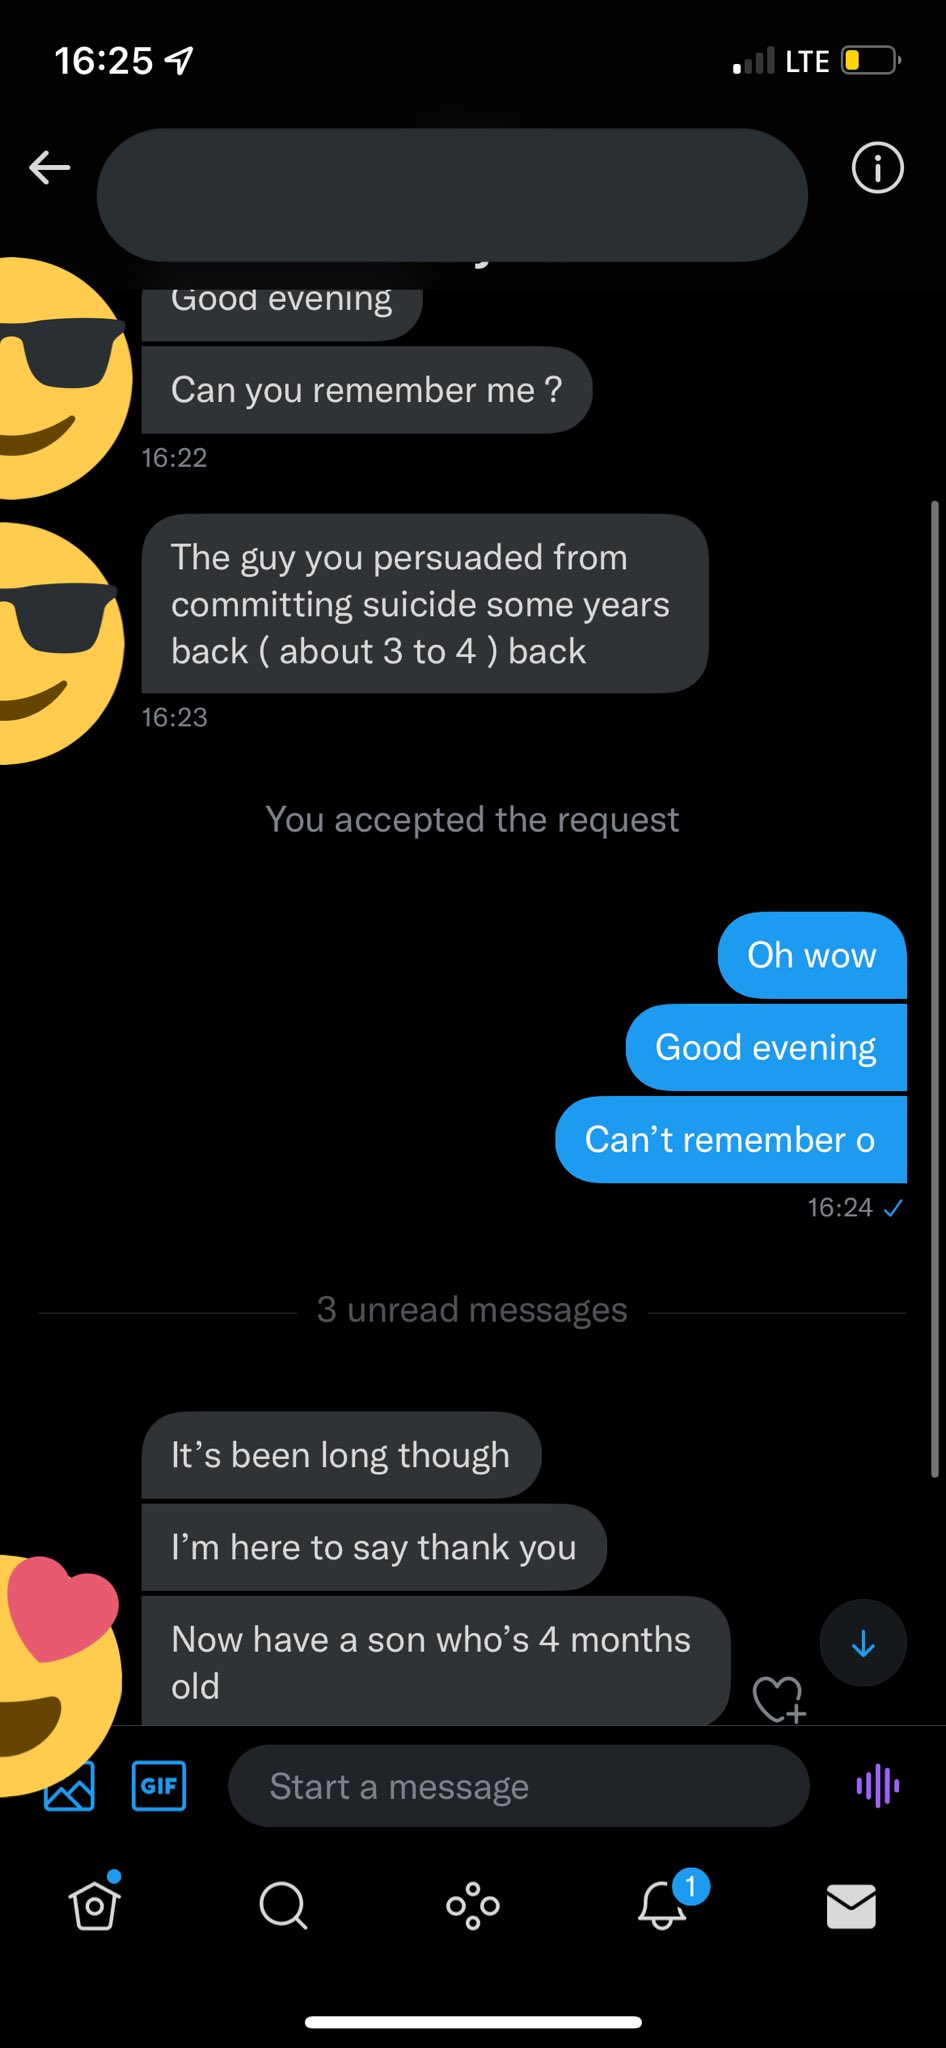 Twitter suicide chat stopped